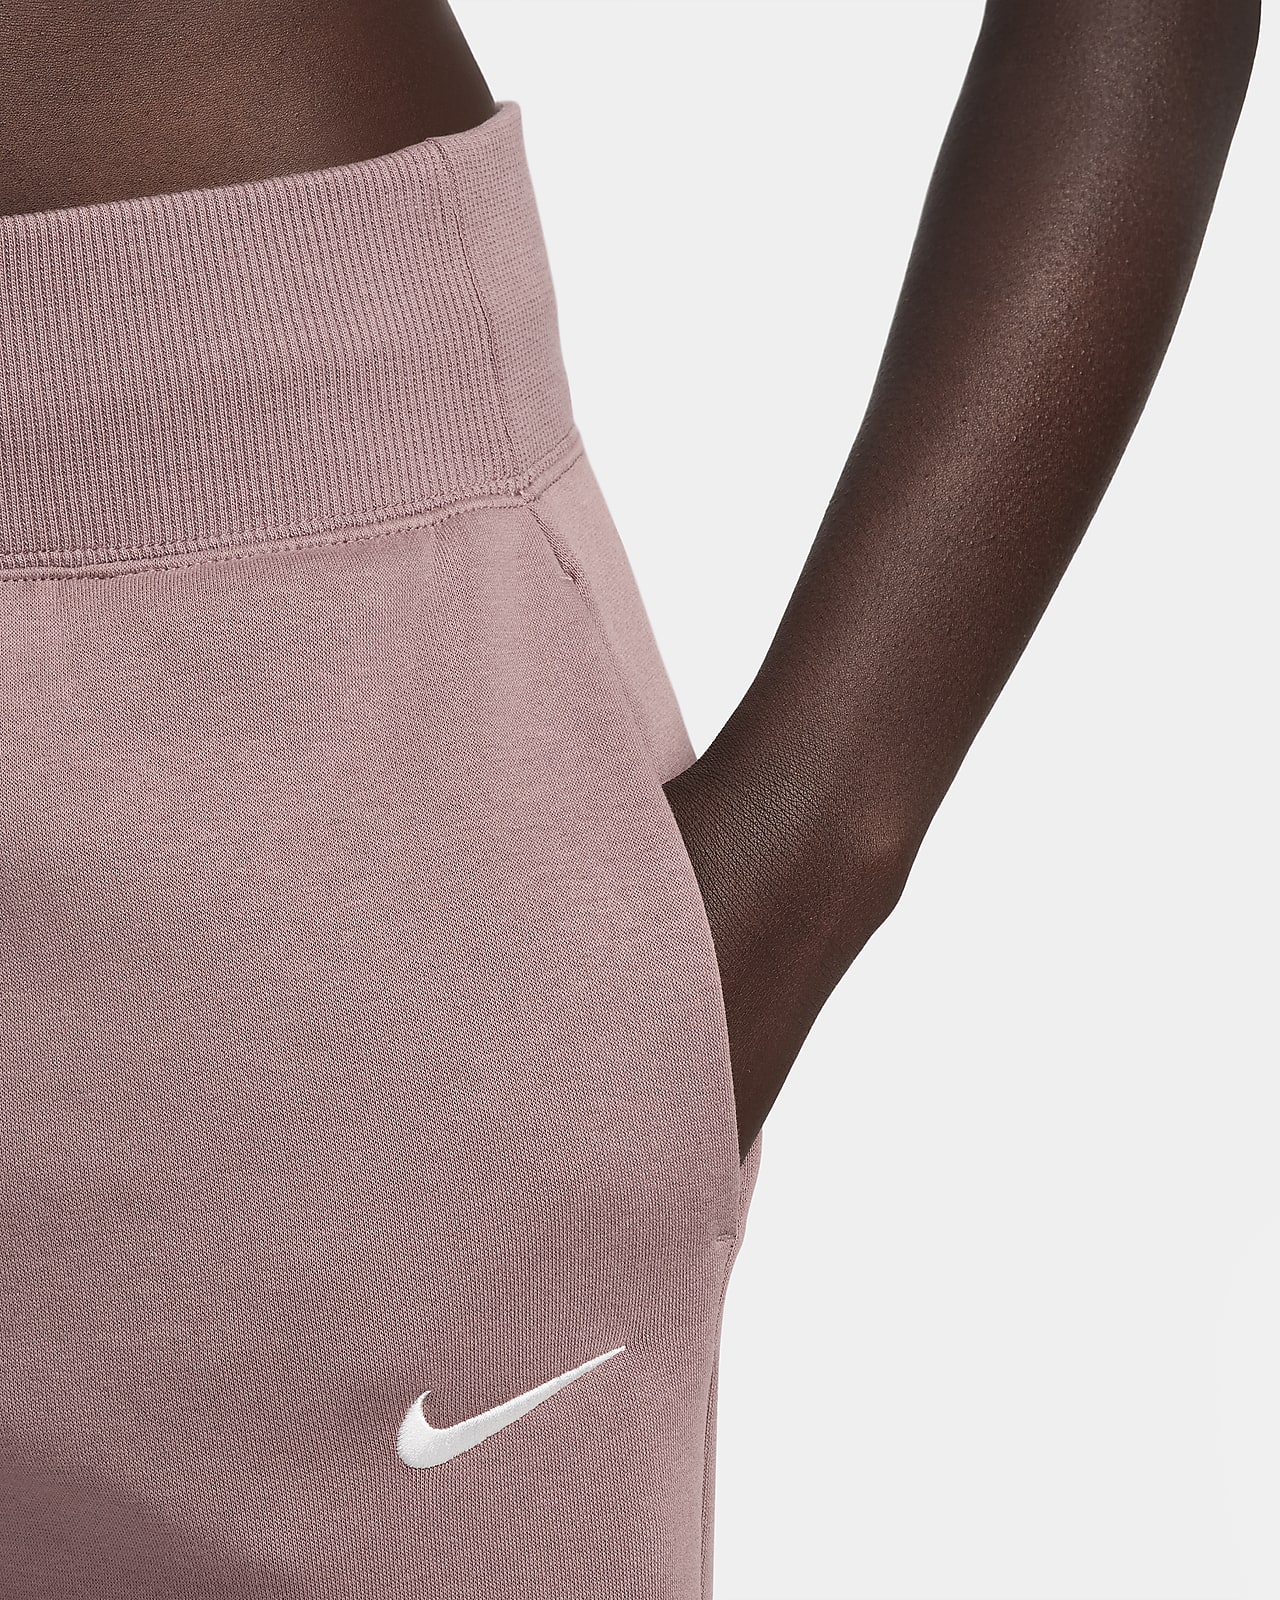 High-Waisted Wide-Leg Tracksuit Bottoms by Nike Online